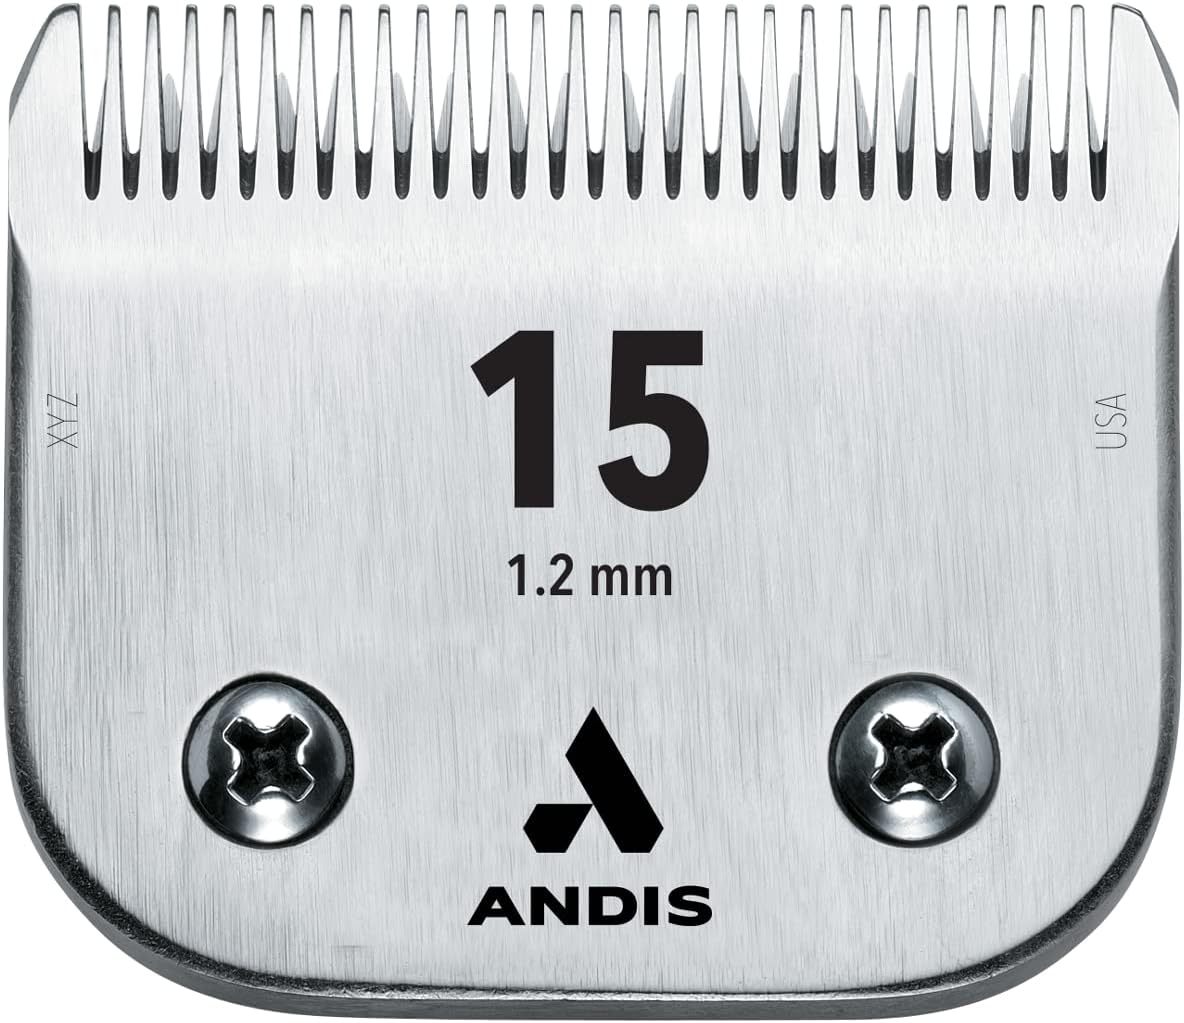 Andis 64072 Ultra Edge Detachable Clipper Blade – Comprised Of Alloy Steel & Carbon, Exclusive Hardening Process For Dogs & Medium-Sized Animals